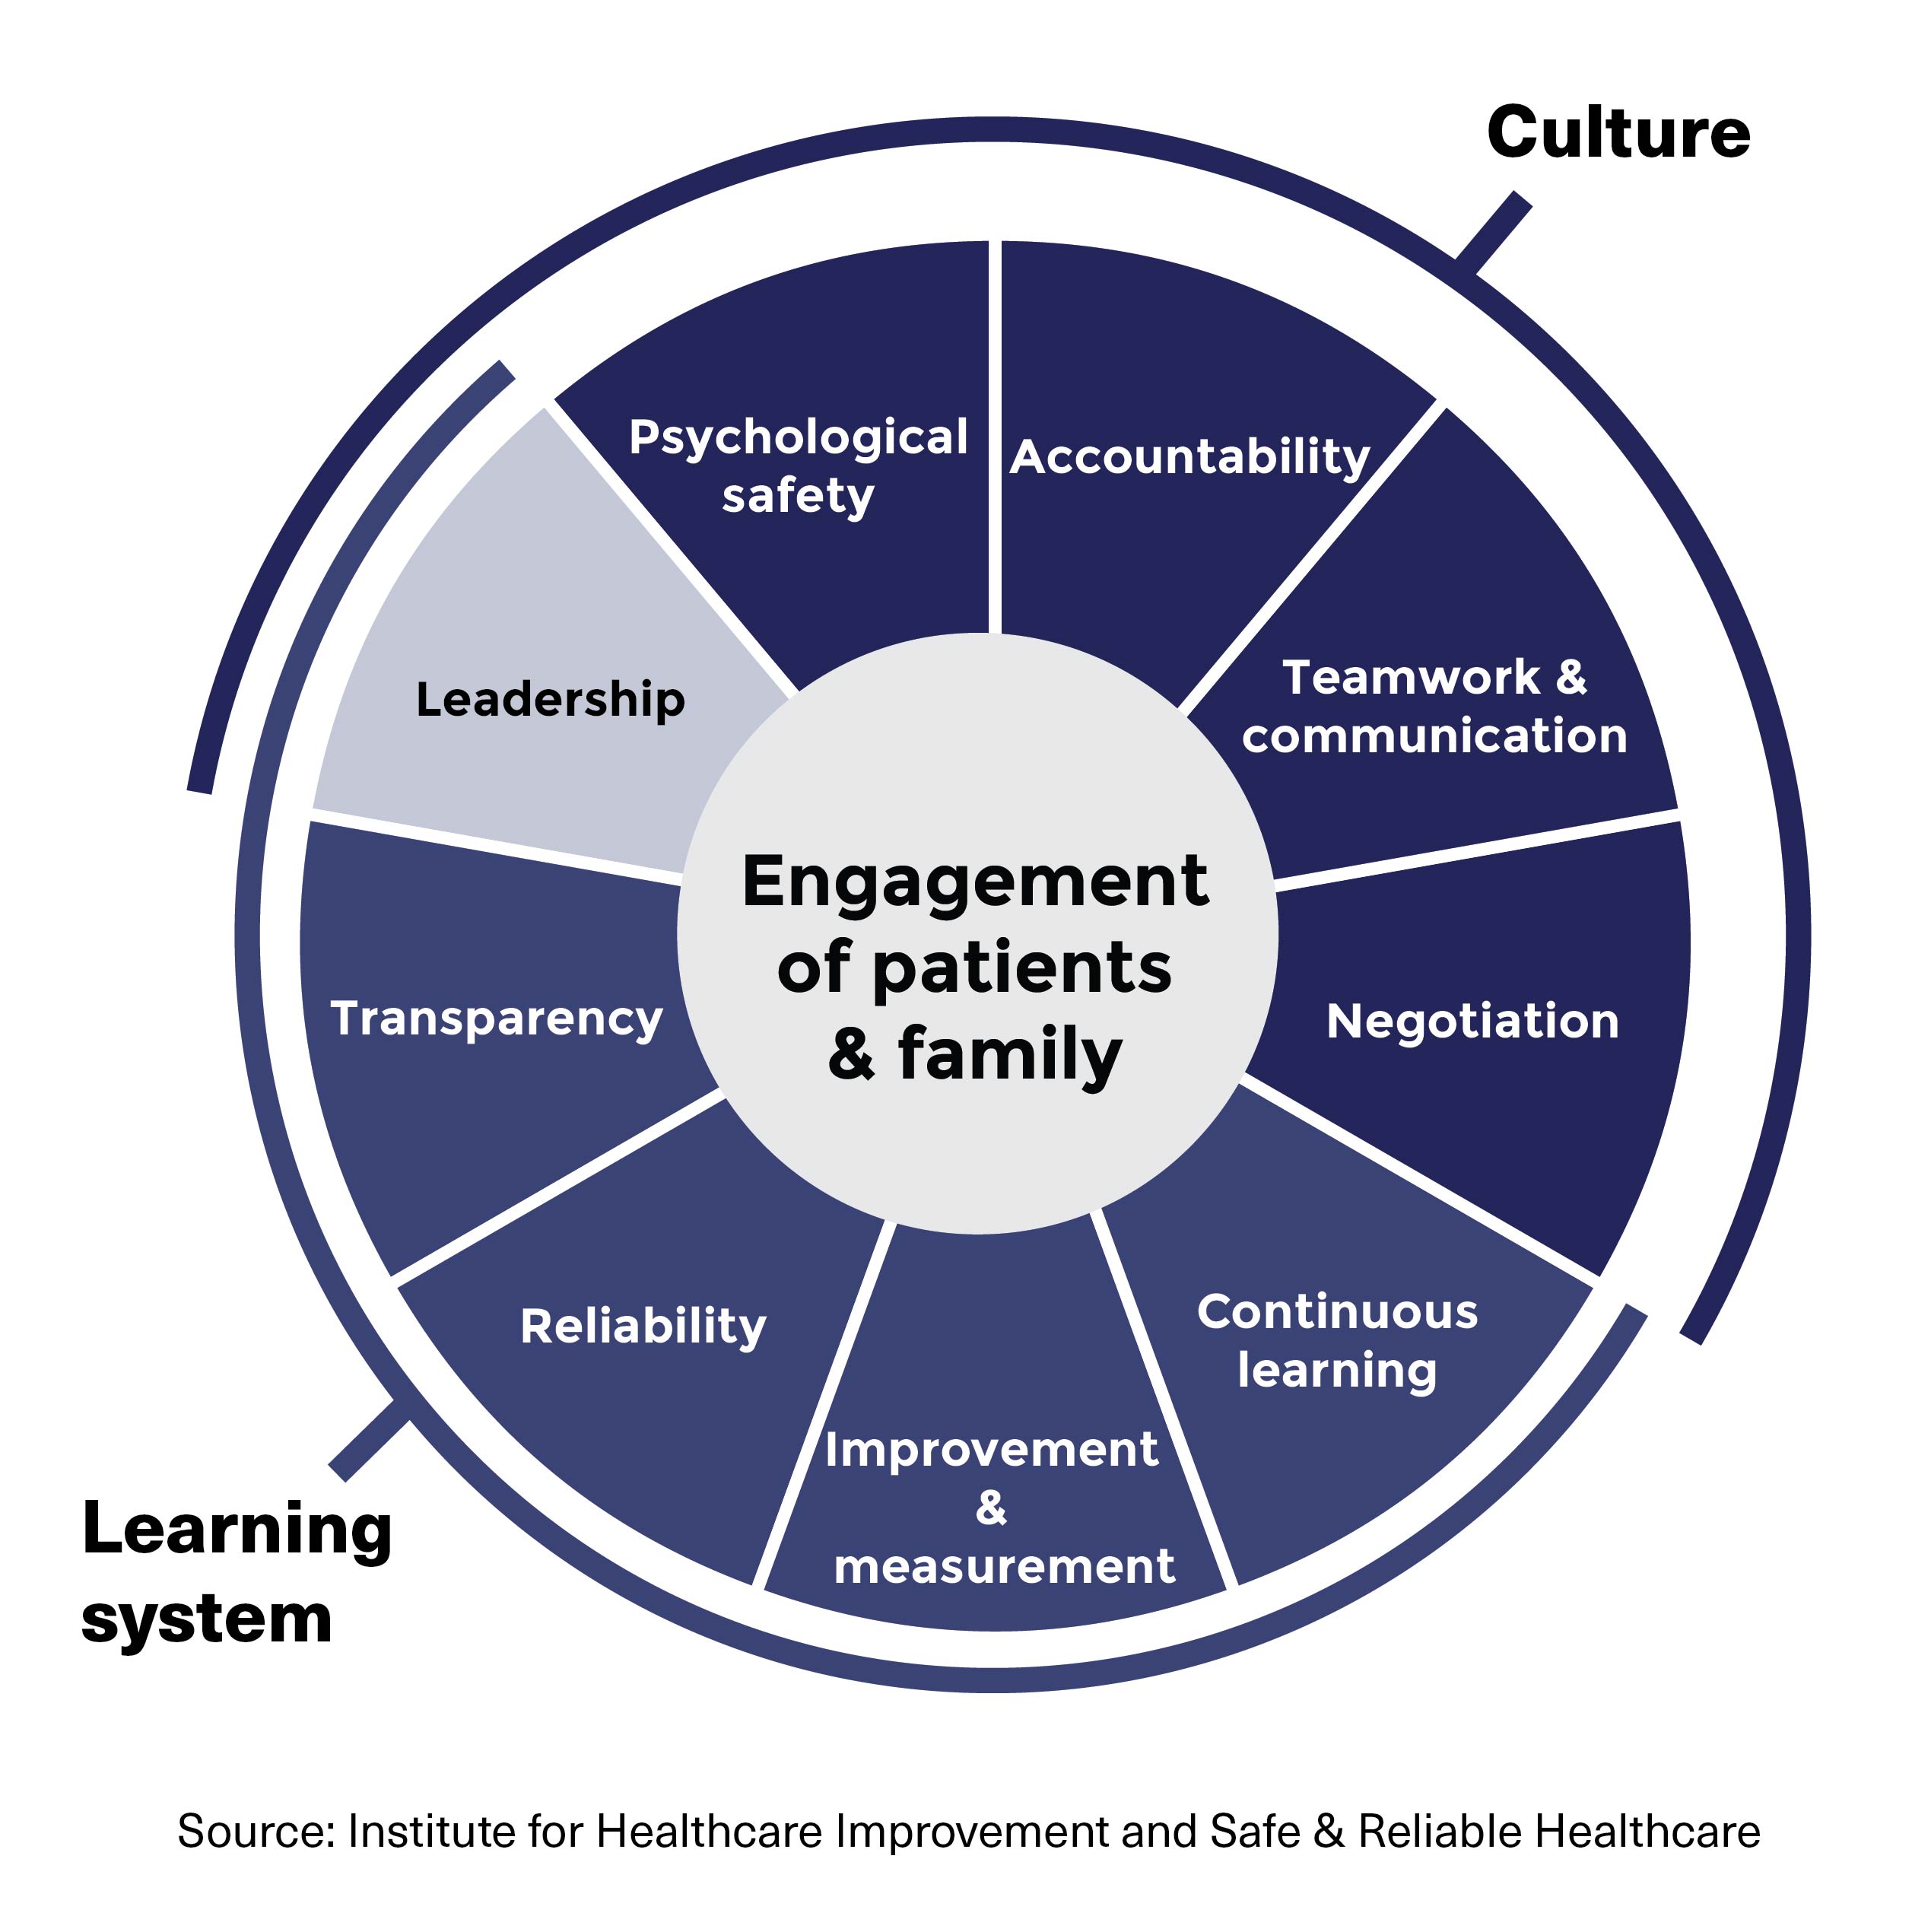 Engagement of patients & family. Culture: leadership, psychological safety, accountability, teamwork & communication, negotiation. Learning system: leadership, transparency, reliability, improvement & measurement, continuous learning.